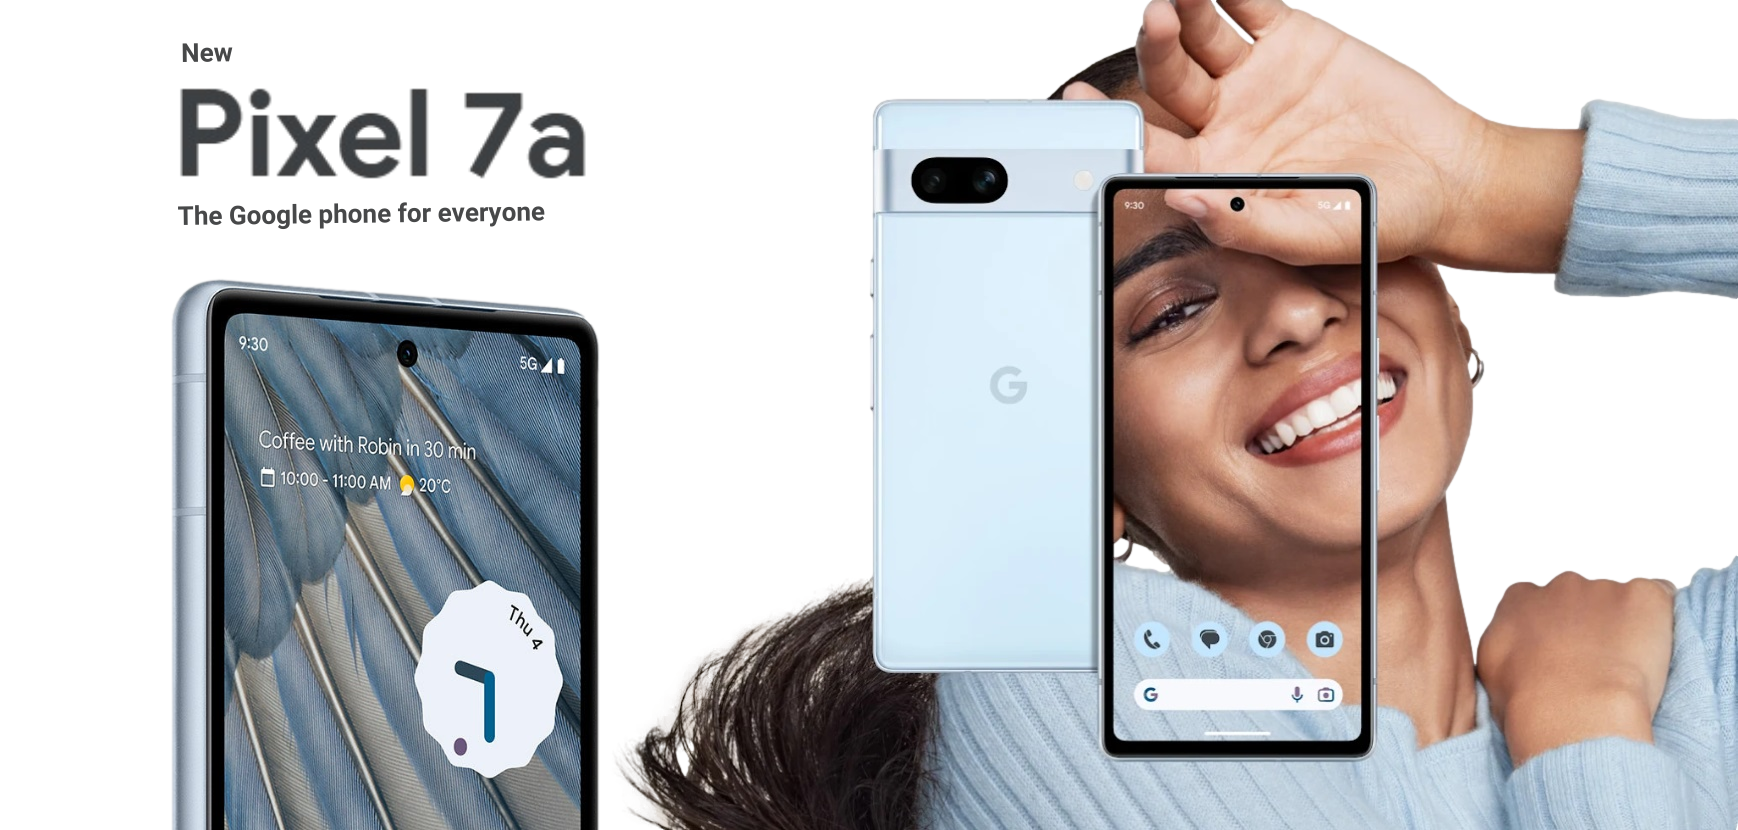 Pixel 7a - The Google phone for everyone